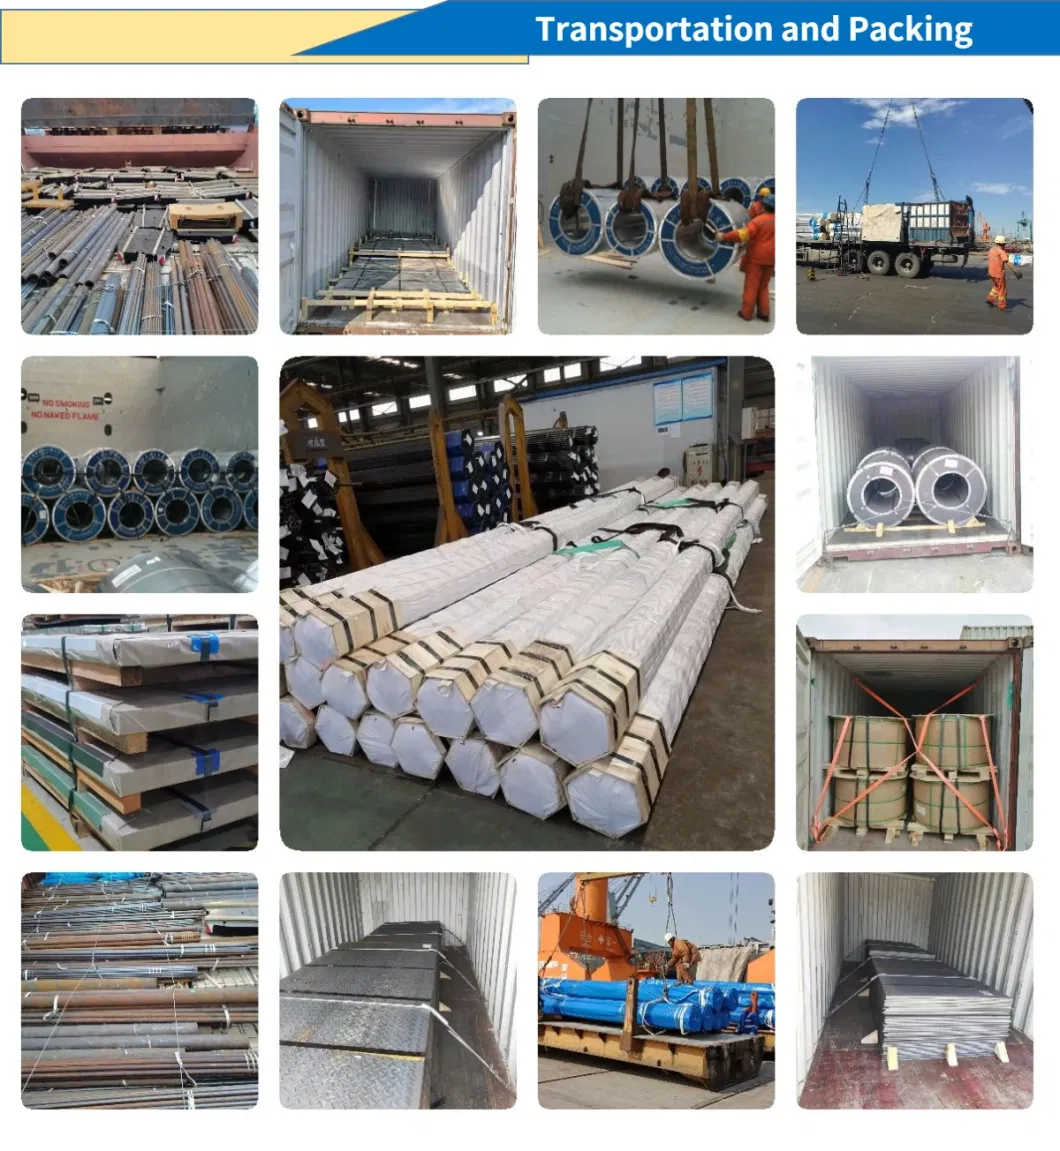 Hot Rolled Forged Steel Ss400 Round Bar SAE 1045 4140 4340 8620 8640 Alloy Steel Round Bars 3Cr2Mo Steel Rods 4Cr13 Steel Bars 15ni3mn Steel Rods